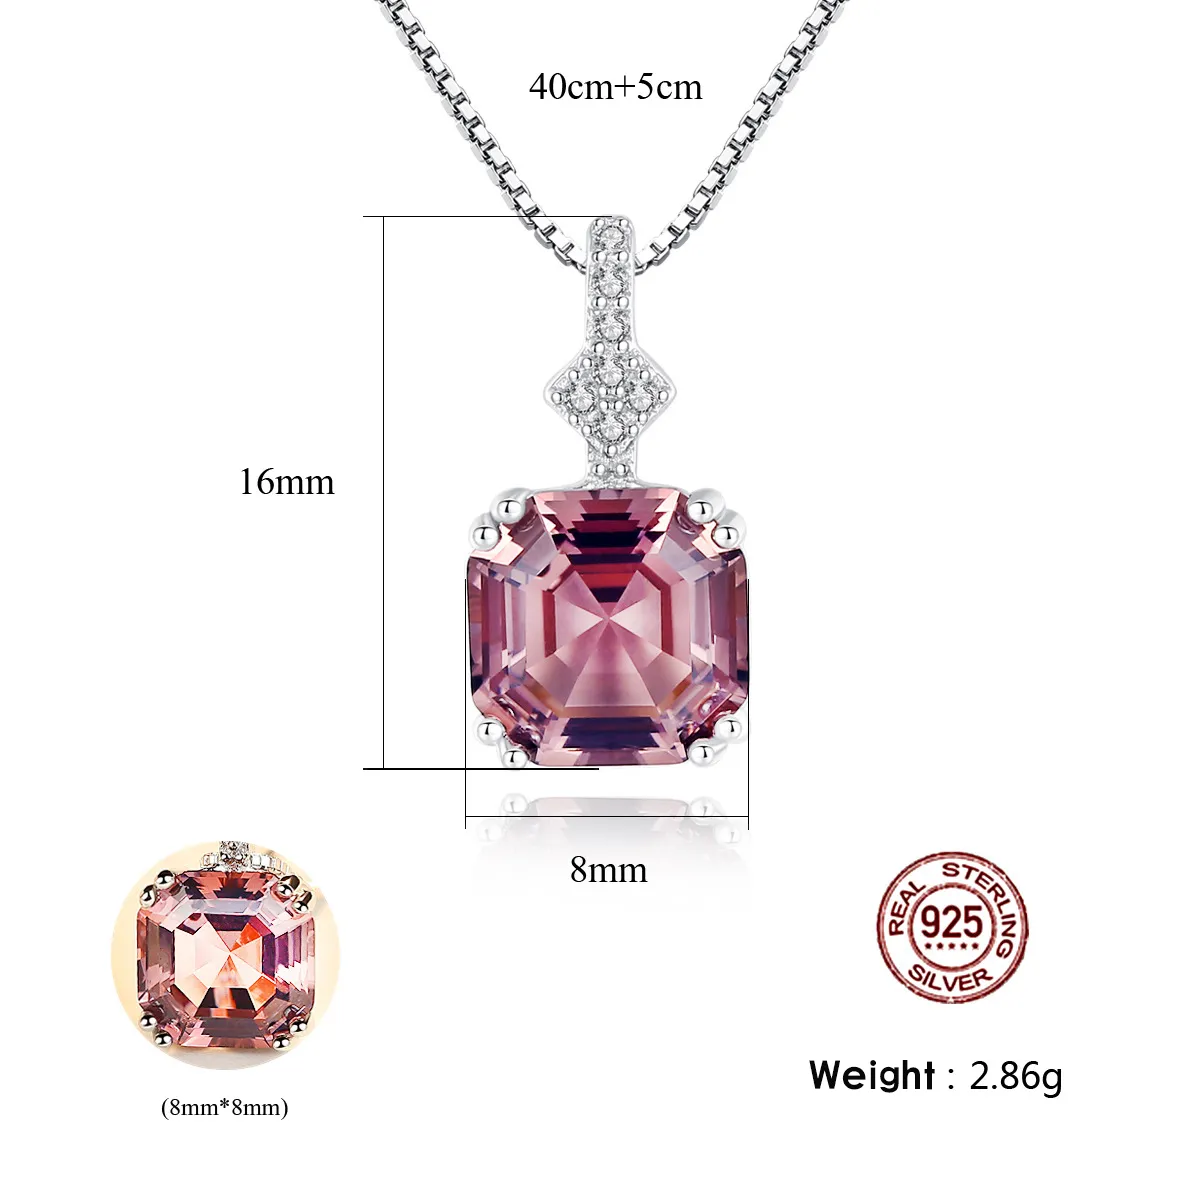 S925 Sterling Silver Necklace for women pendant necklace with Morganite noble jewelry accessories whole2339249